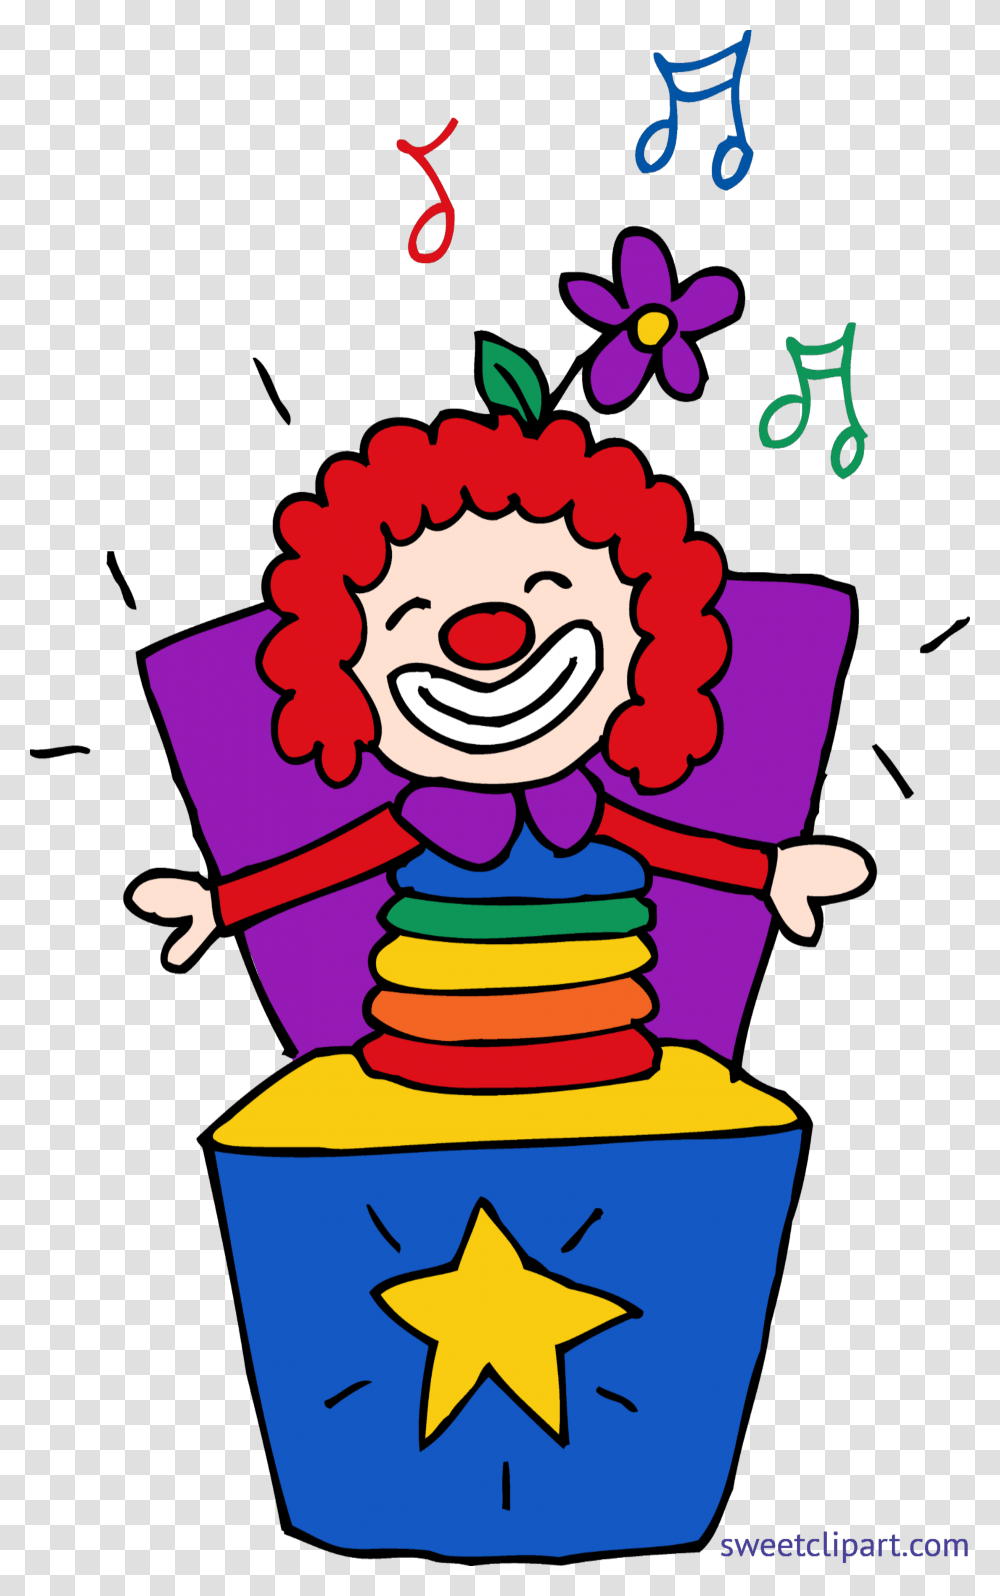 Jack In The Box Clip Art, Performer, Face, Costume, Clown Transparent Png